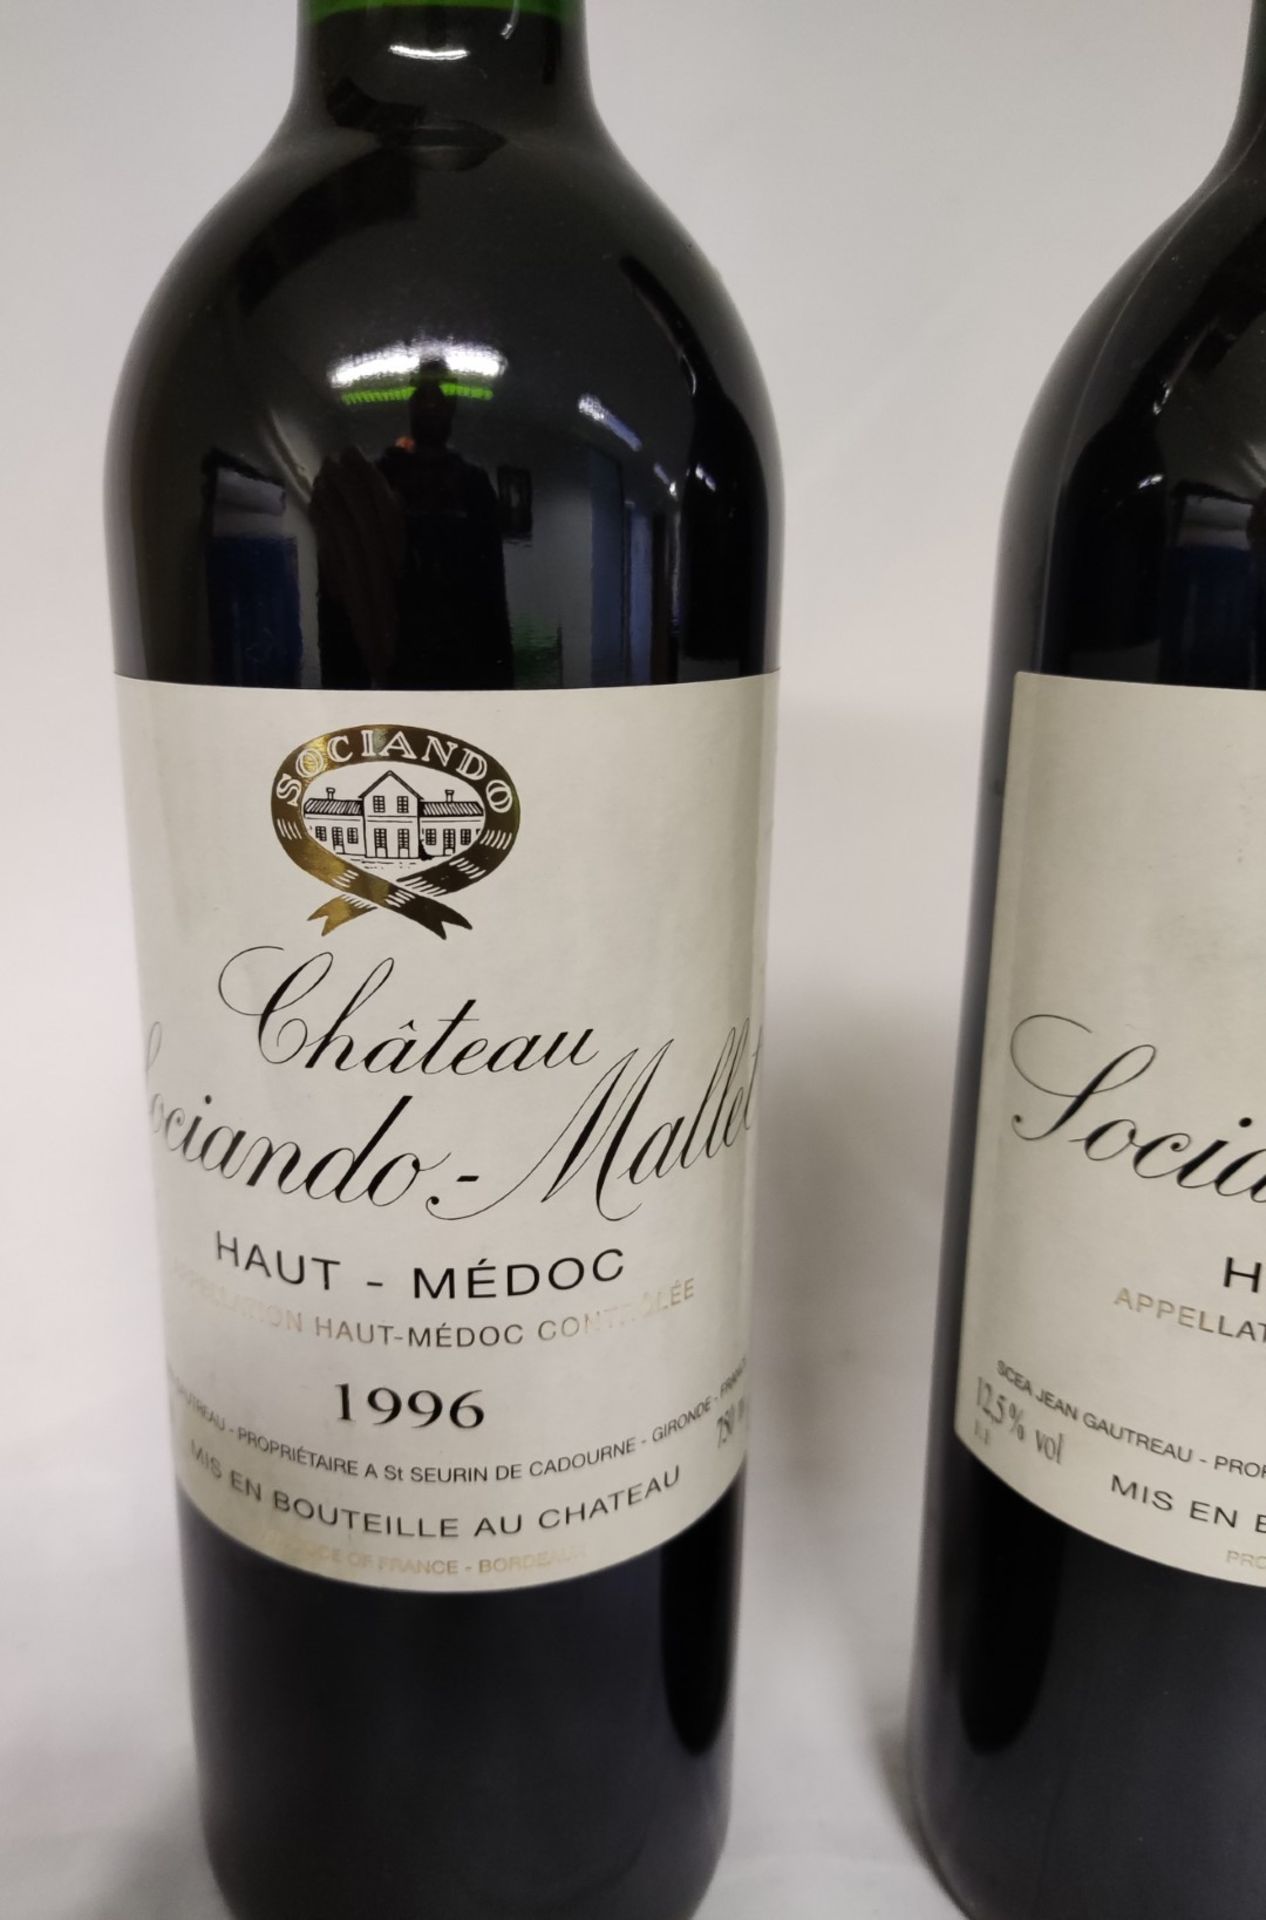 2 x Bottles of 1996 Chateau Sociando-Mallet, Haut-Medoc, France - Dry Red Wine - RRP £260 - Image 4 of 7